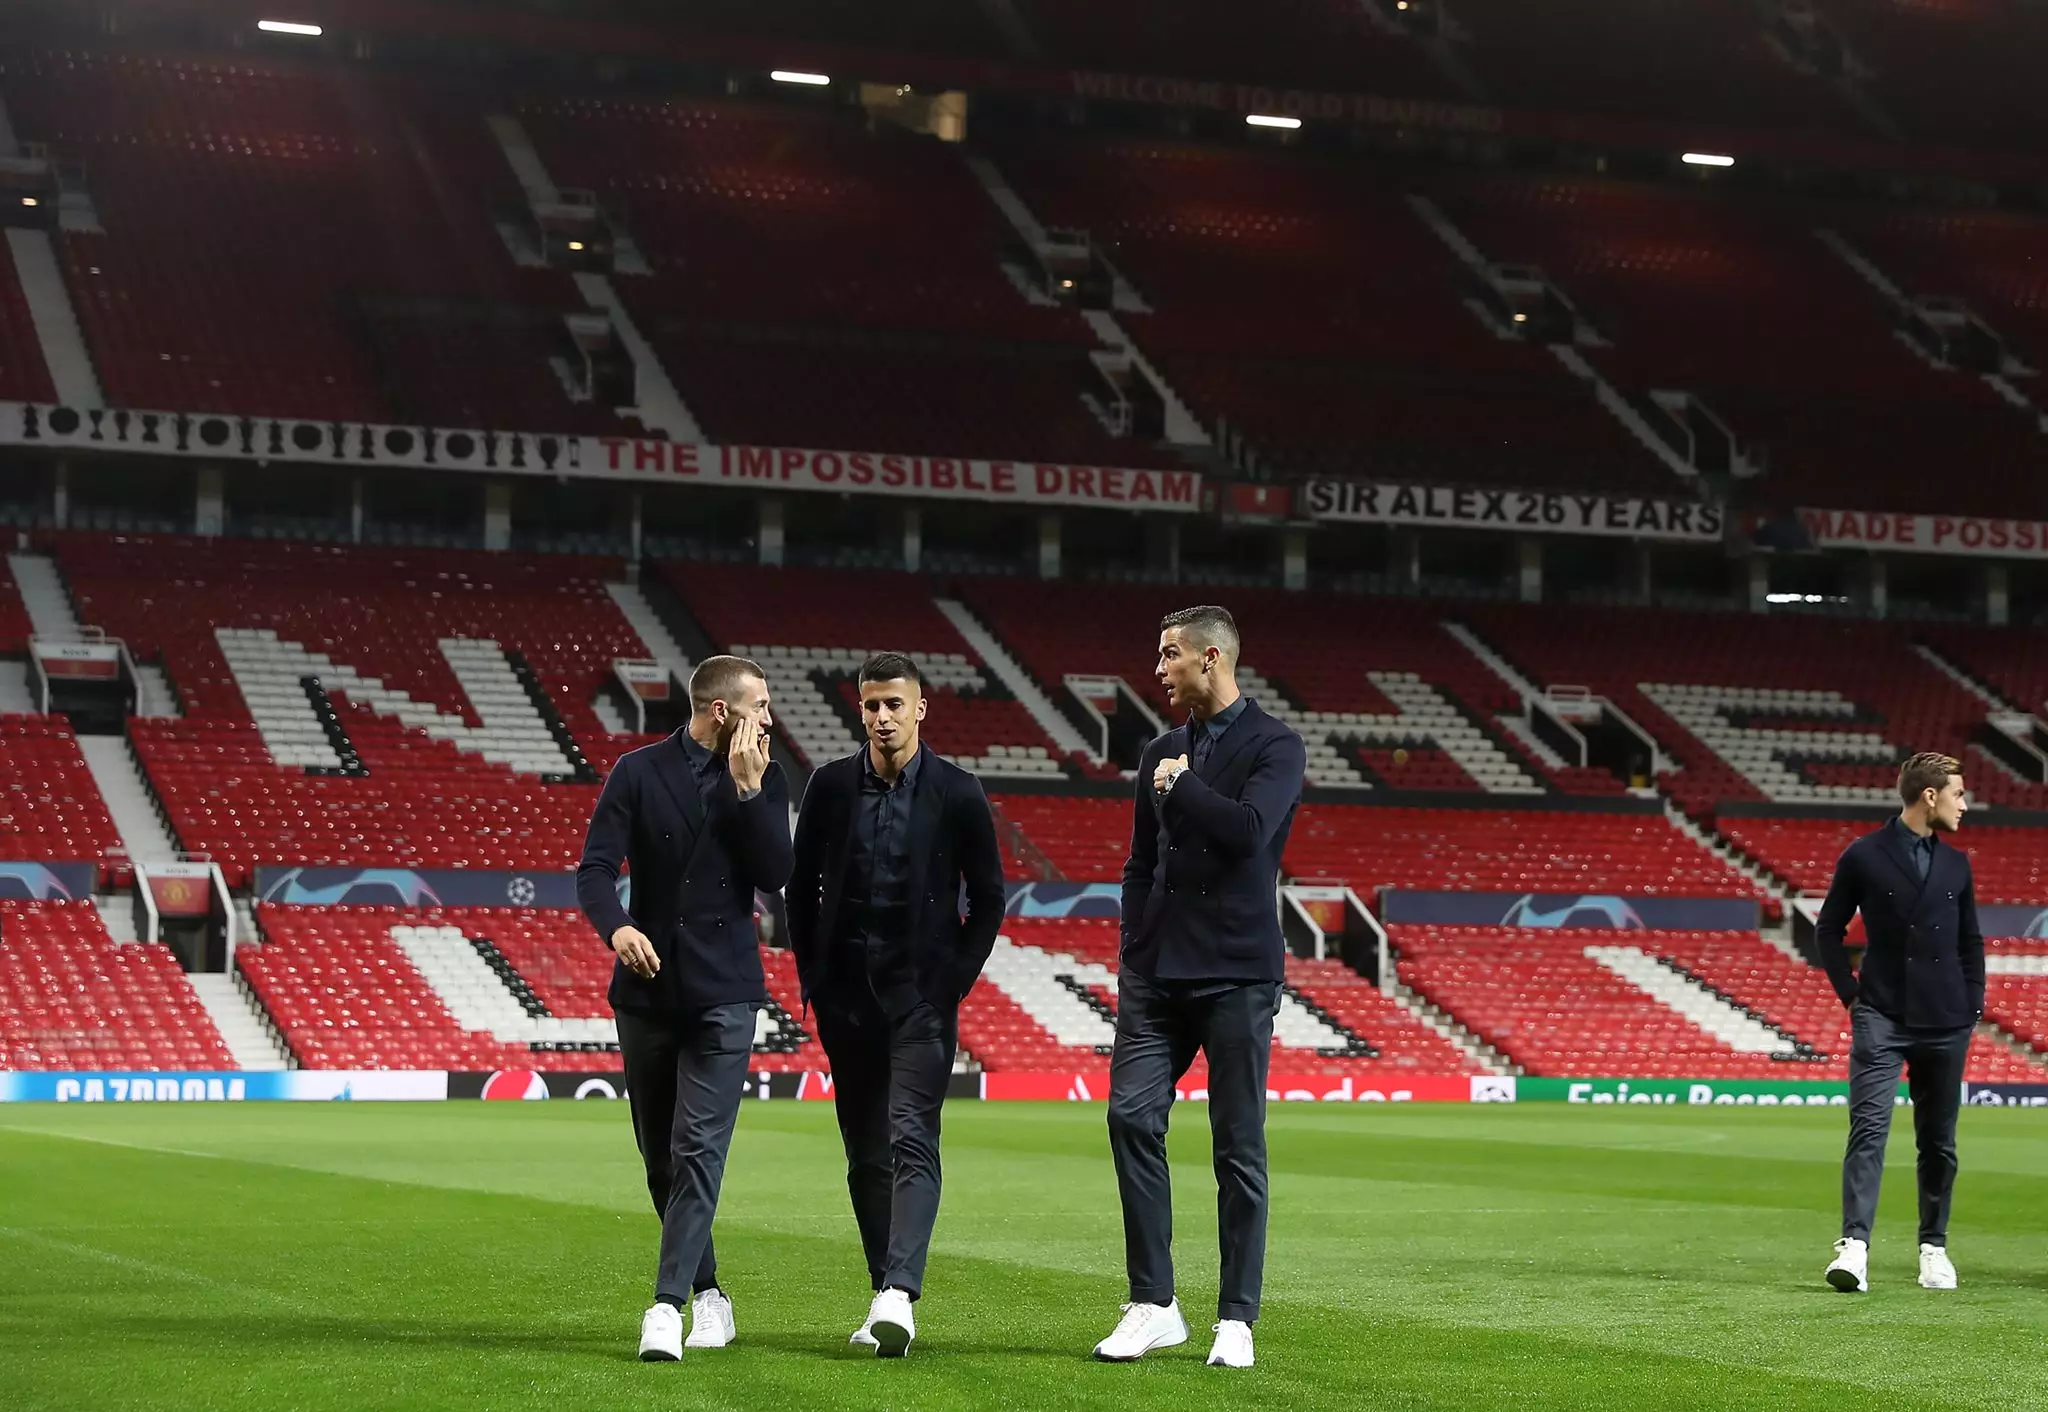 Ronaldo takes a stroll on the Old Trafford pitch. Image: PA